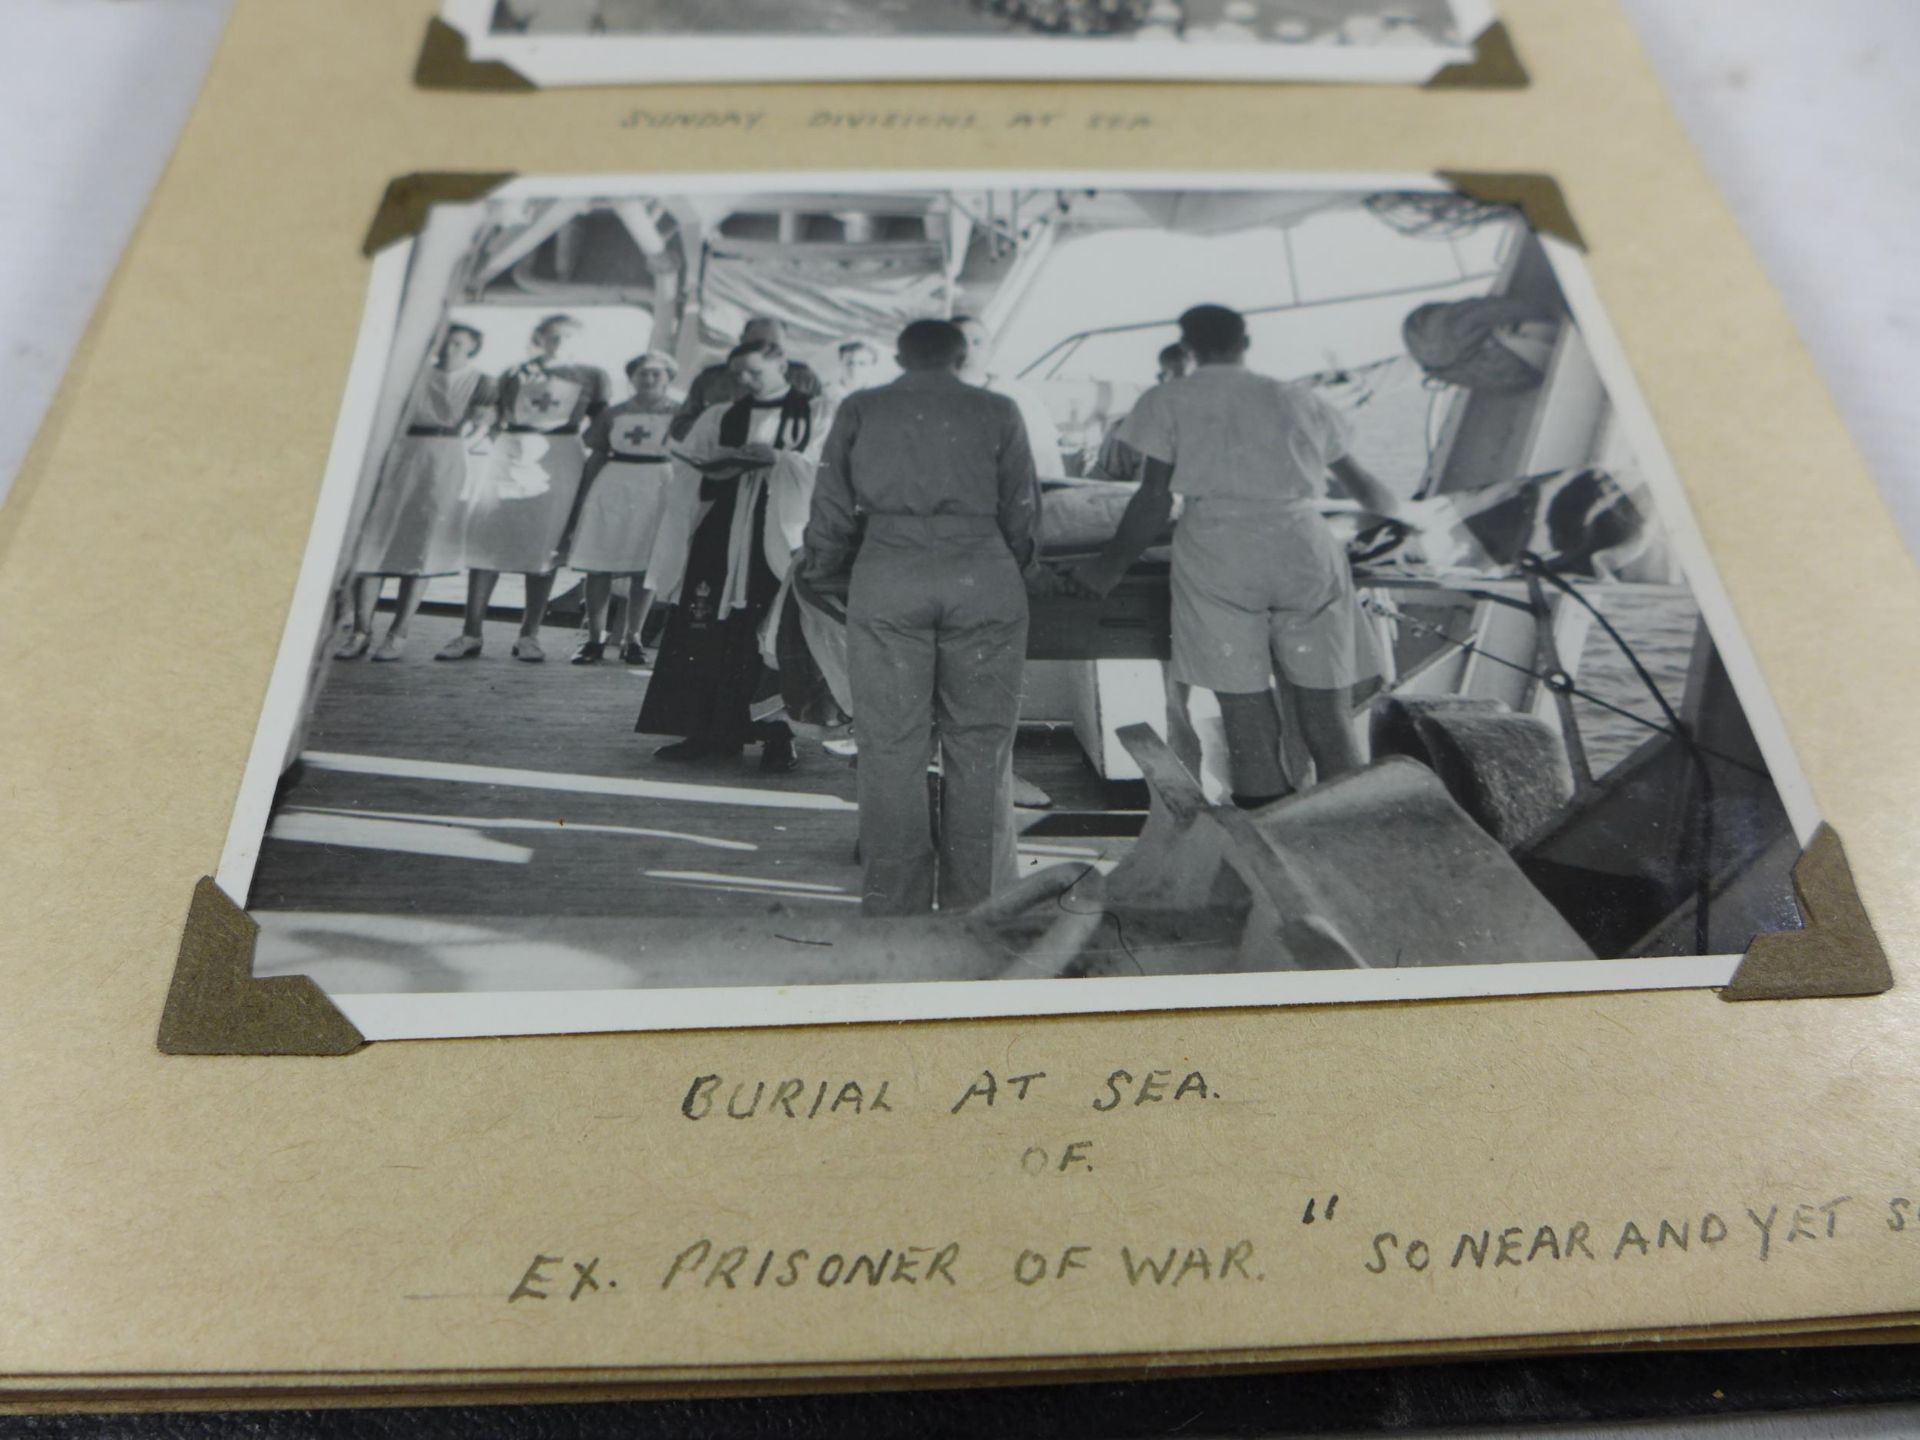 A WORLD WAR II PHOTOGRAPH ALBUM CONTAINING PHOTOGRAPHS OF THE JAPANESE SIGNING OF THE INSTRUMENT - Image 4 of 9